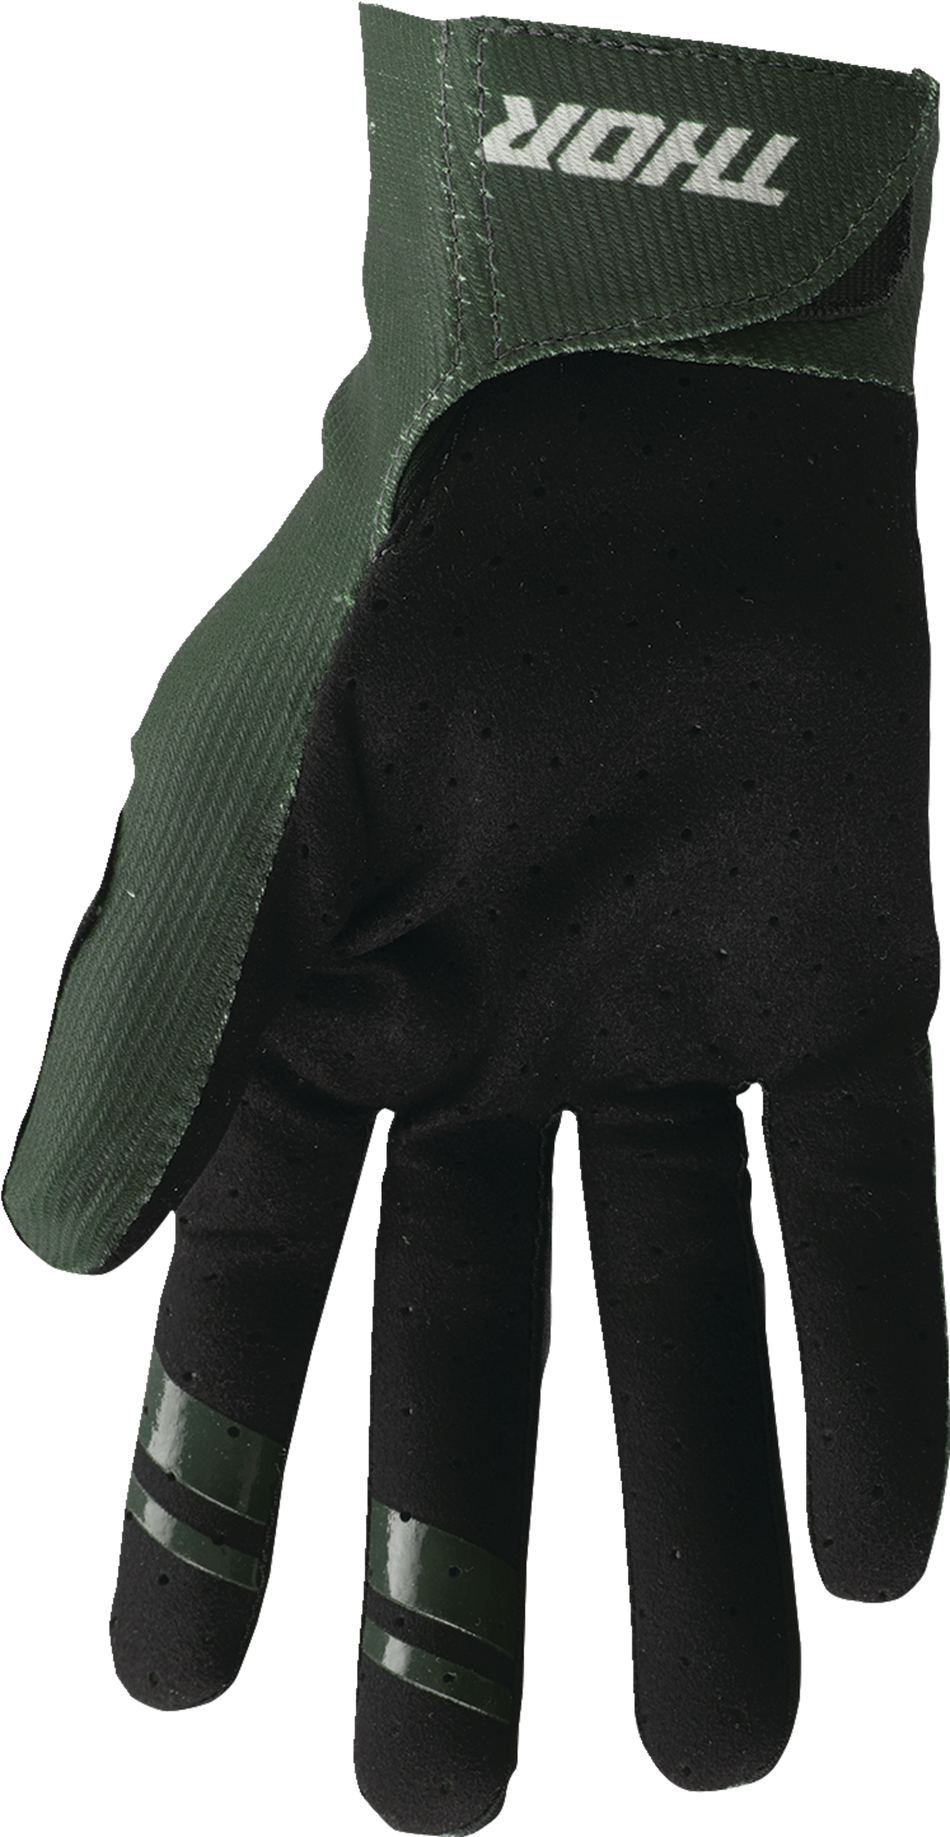 THOR Intense Assist Censis Gloves - Forest Green - 2XL 3360-0234